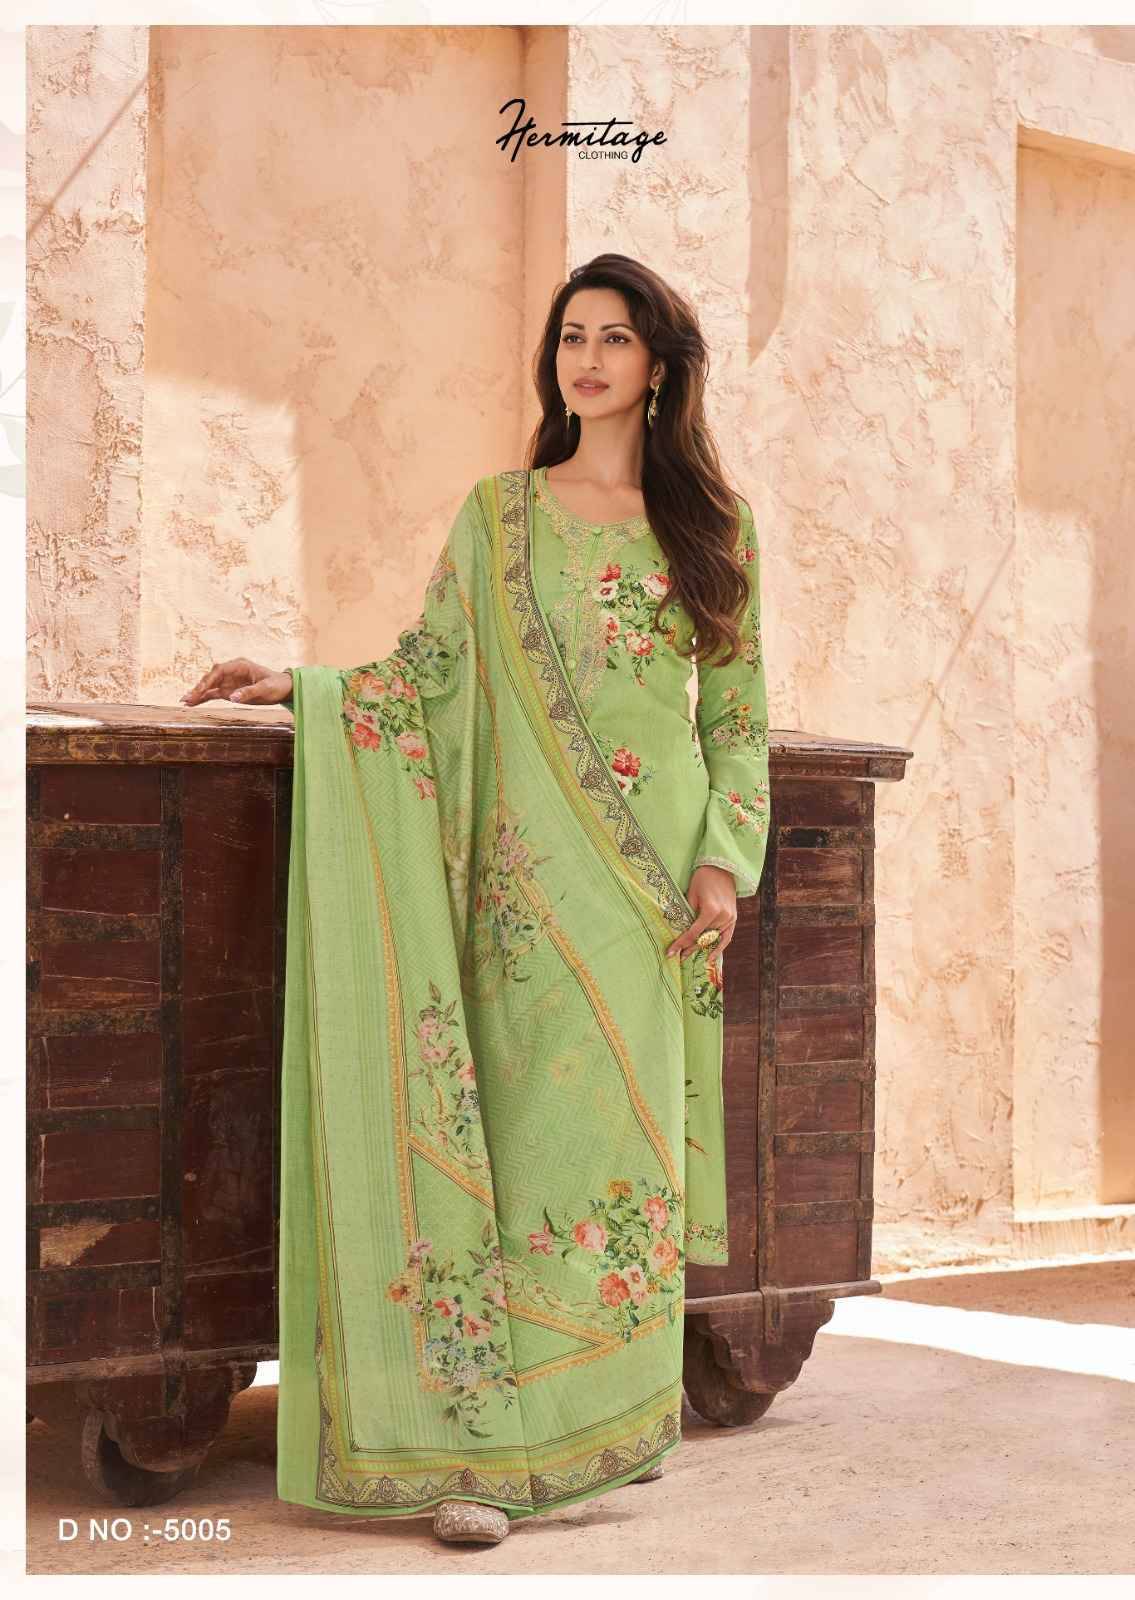 Amahle By Hermitage 5001 To 5006 Series Beautiful Festive Suits Stylish Fancy Colorful Casual Wear & Ethnic Wear Pure Jam Cotton Print Dresses At Wholesale Price